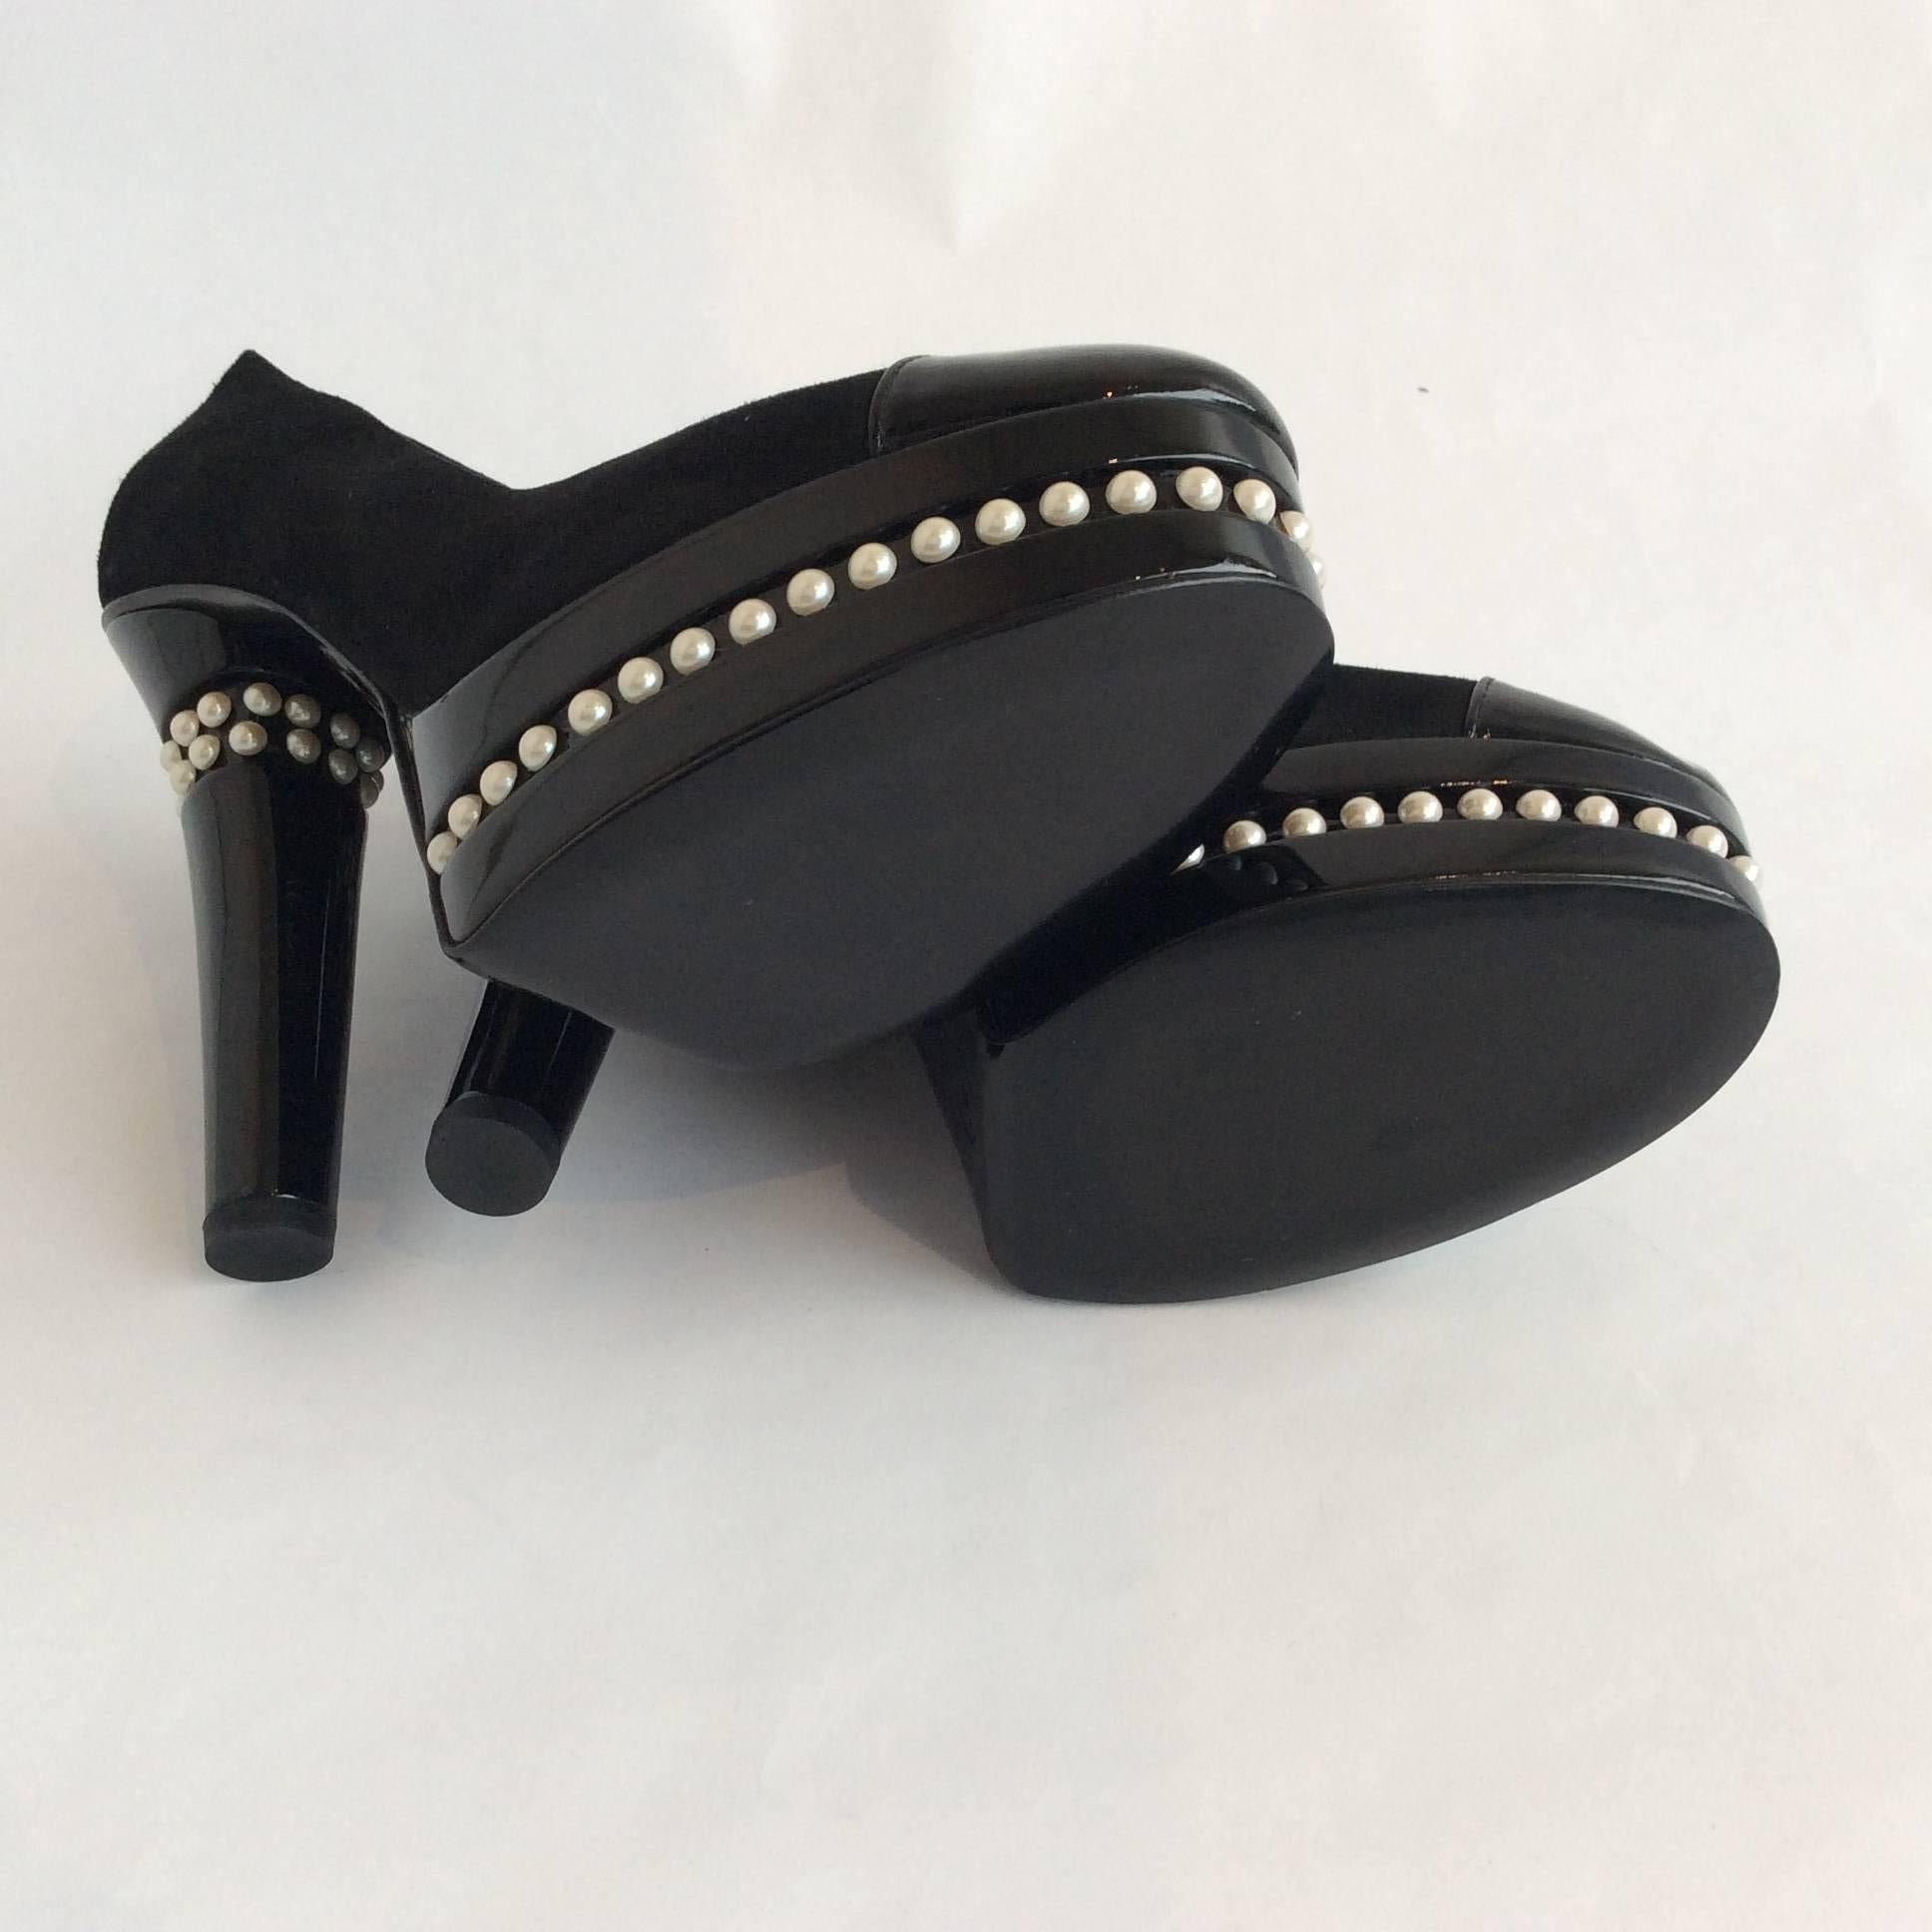 Chanel Black Suede And Patent Leather Platform Pumps With Pearl Detail Sz38 3